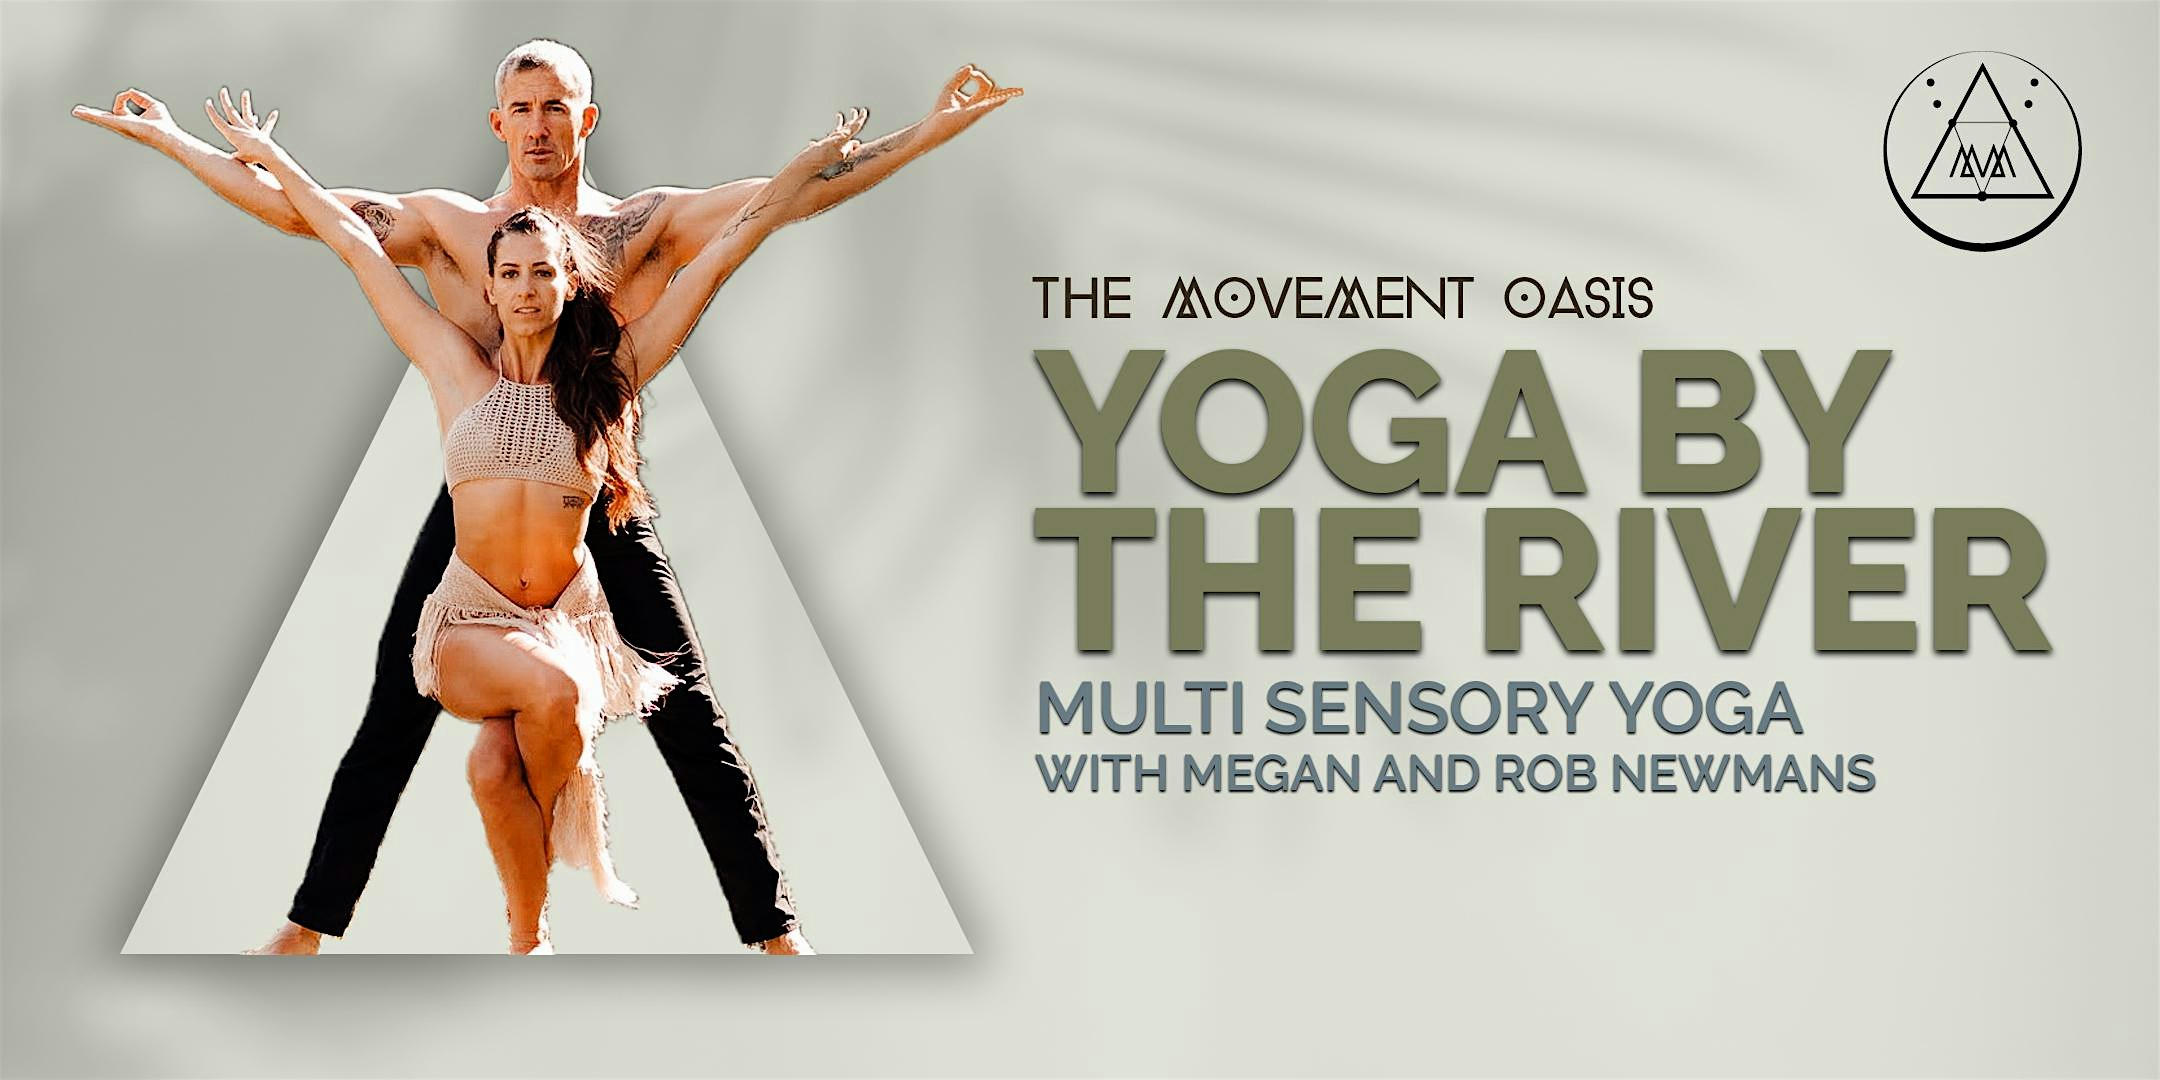 YOGA BY THE RIVER – MULTI SENSORY  with Megan & Rob Newmans